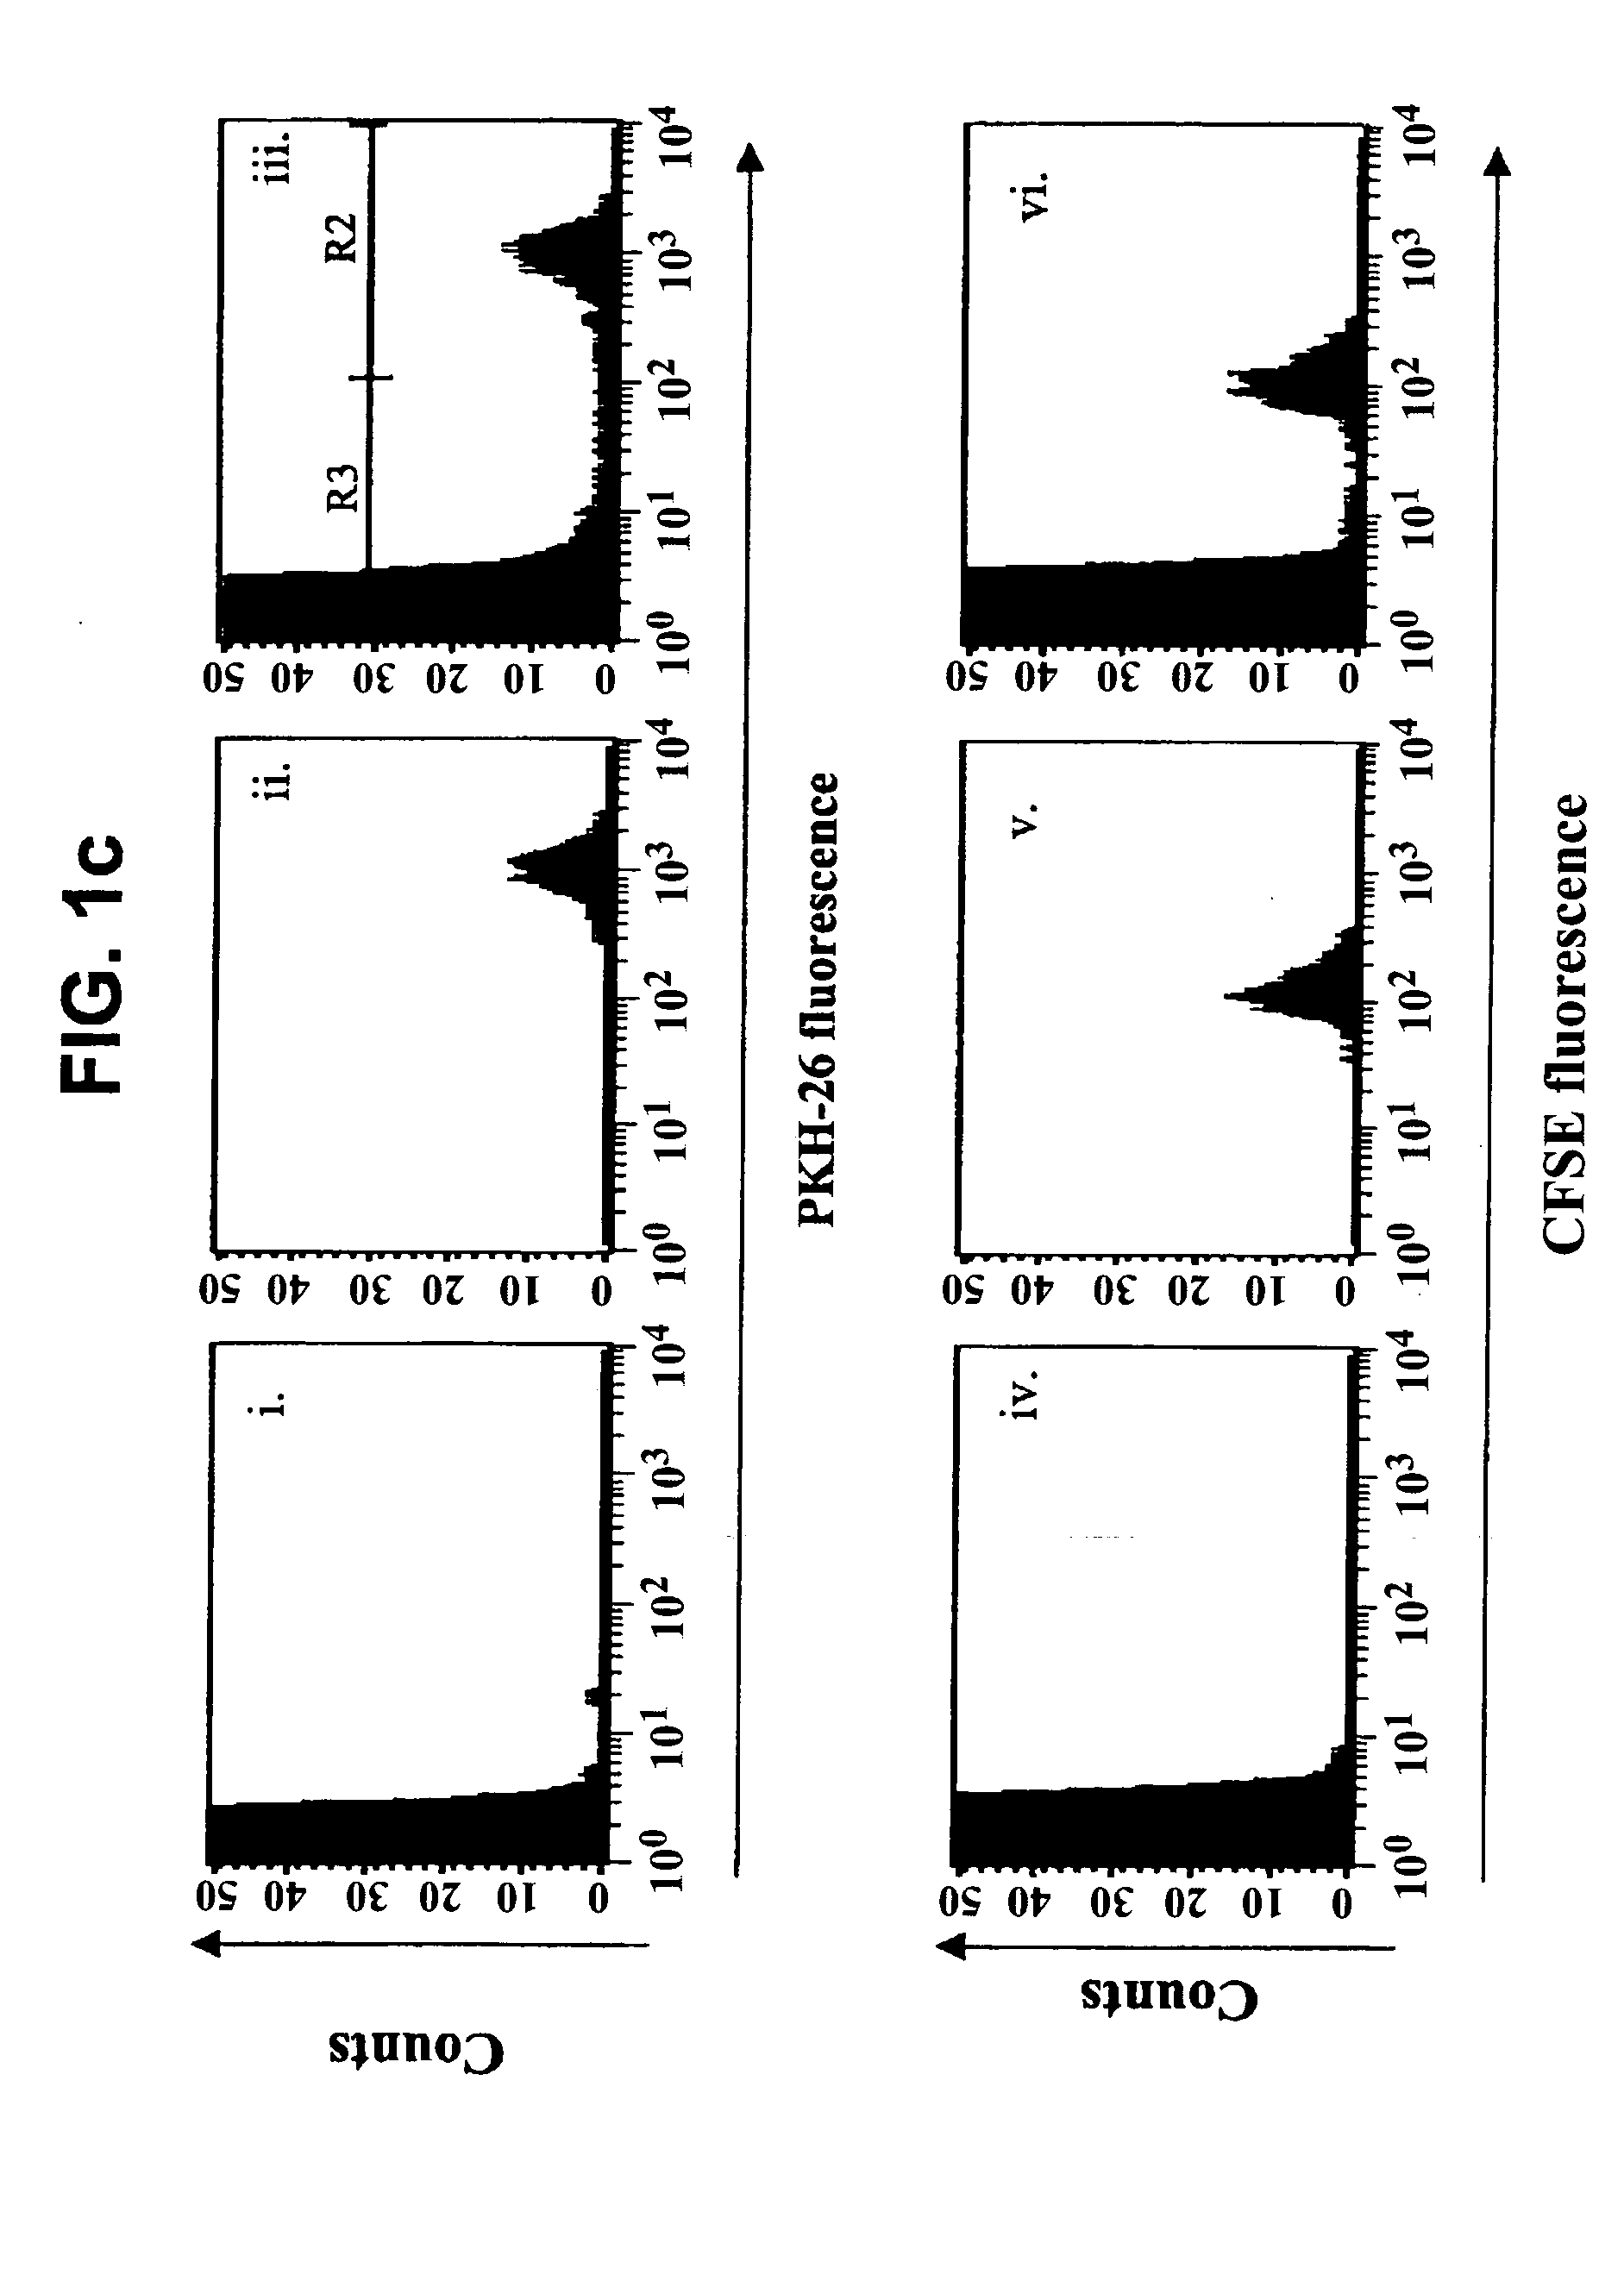 Methods of detecting specific cell lysis